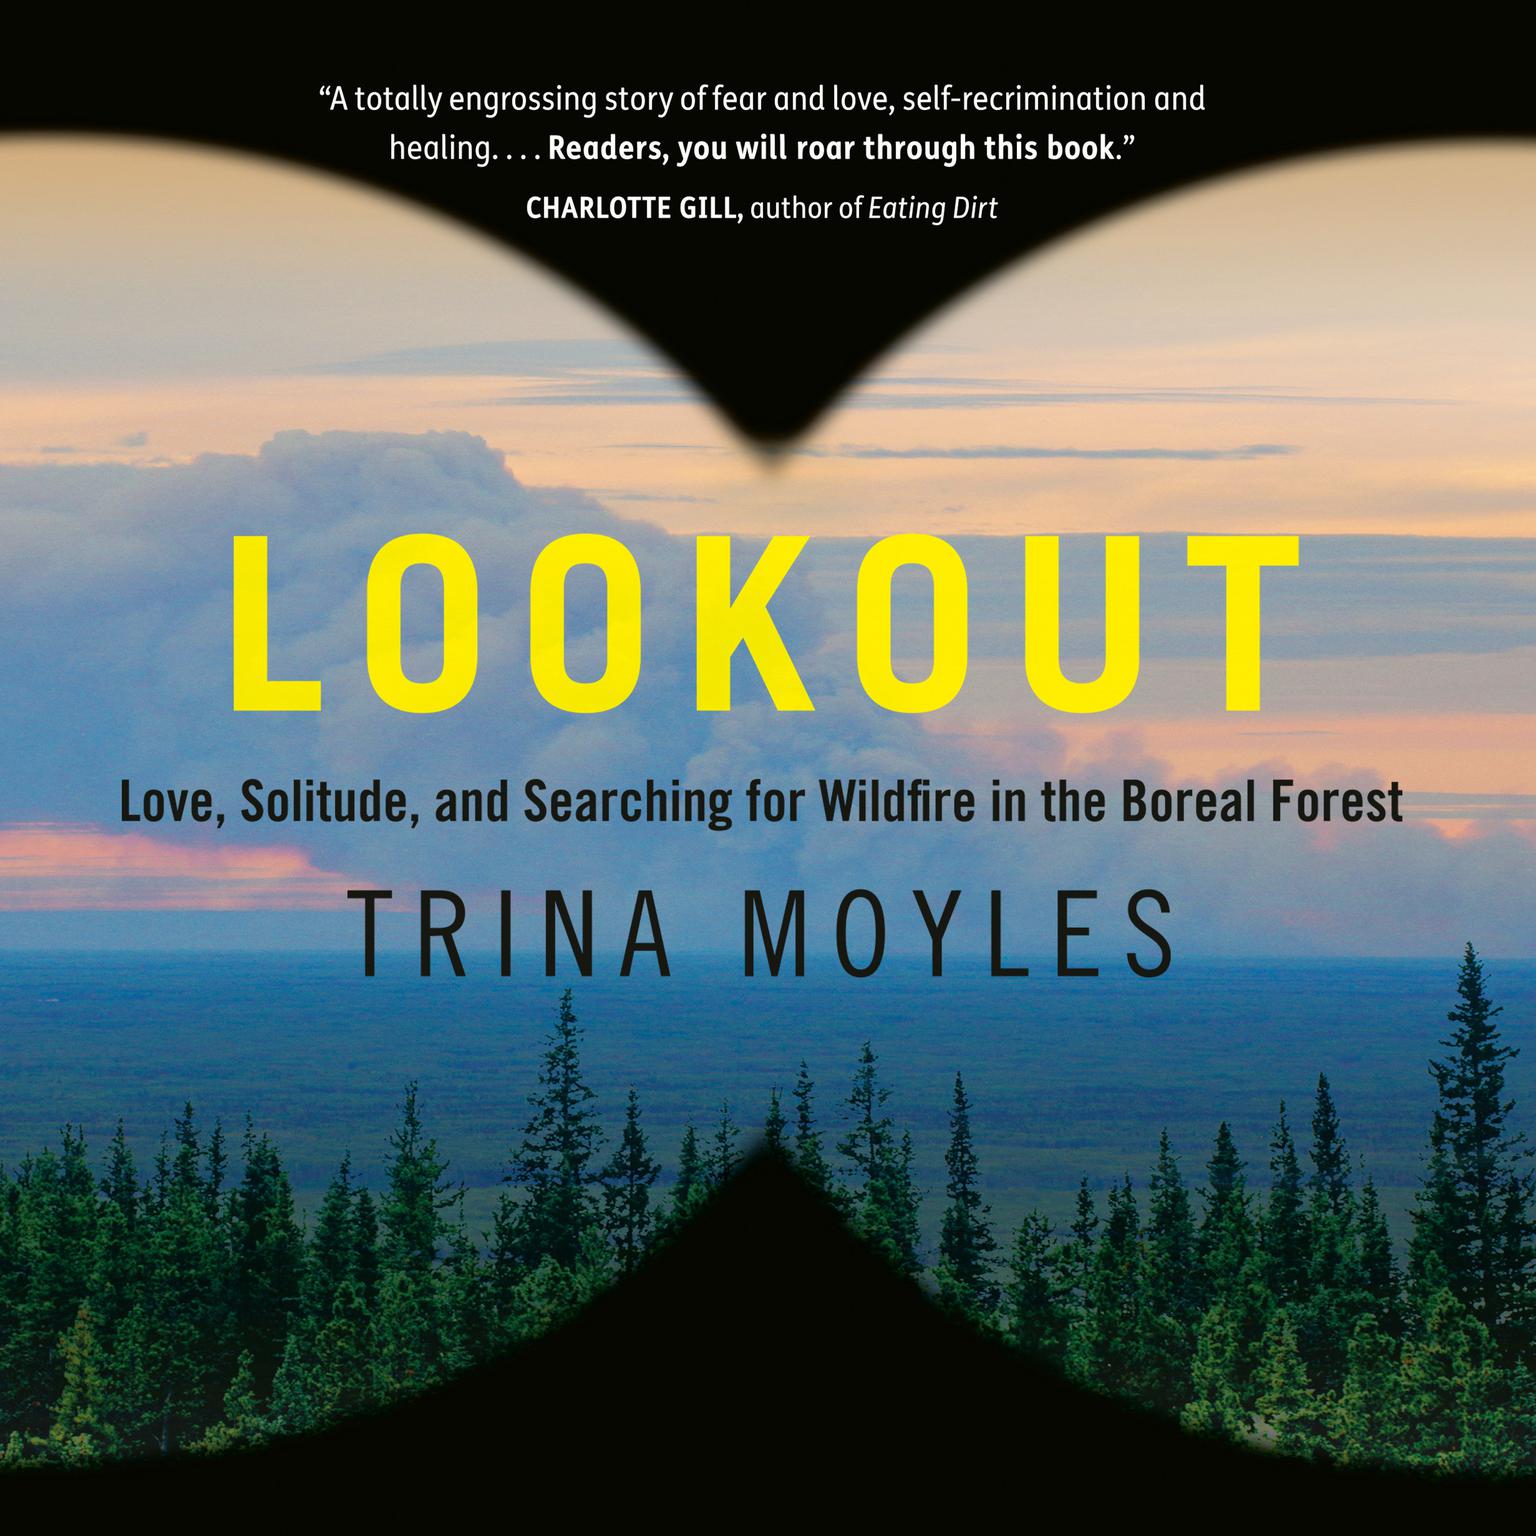 Lookout: Love, Solitude, and Searching for Wildfire in the Boreal Forest Audiobook, by Trina Moyles